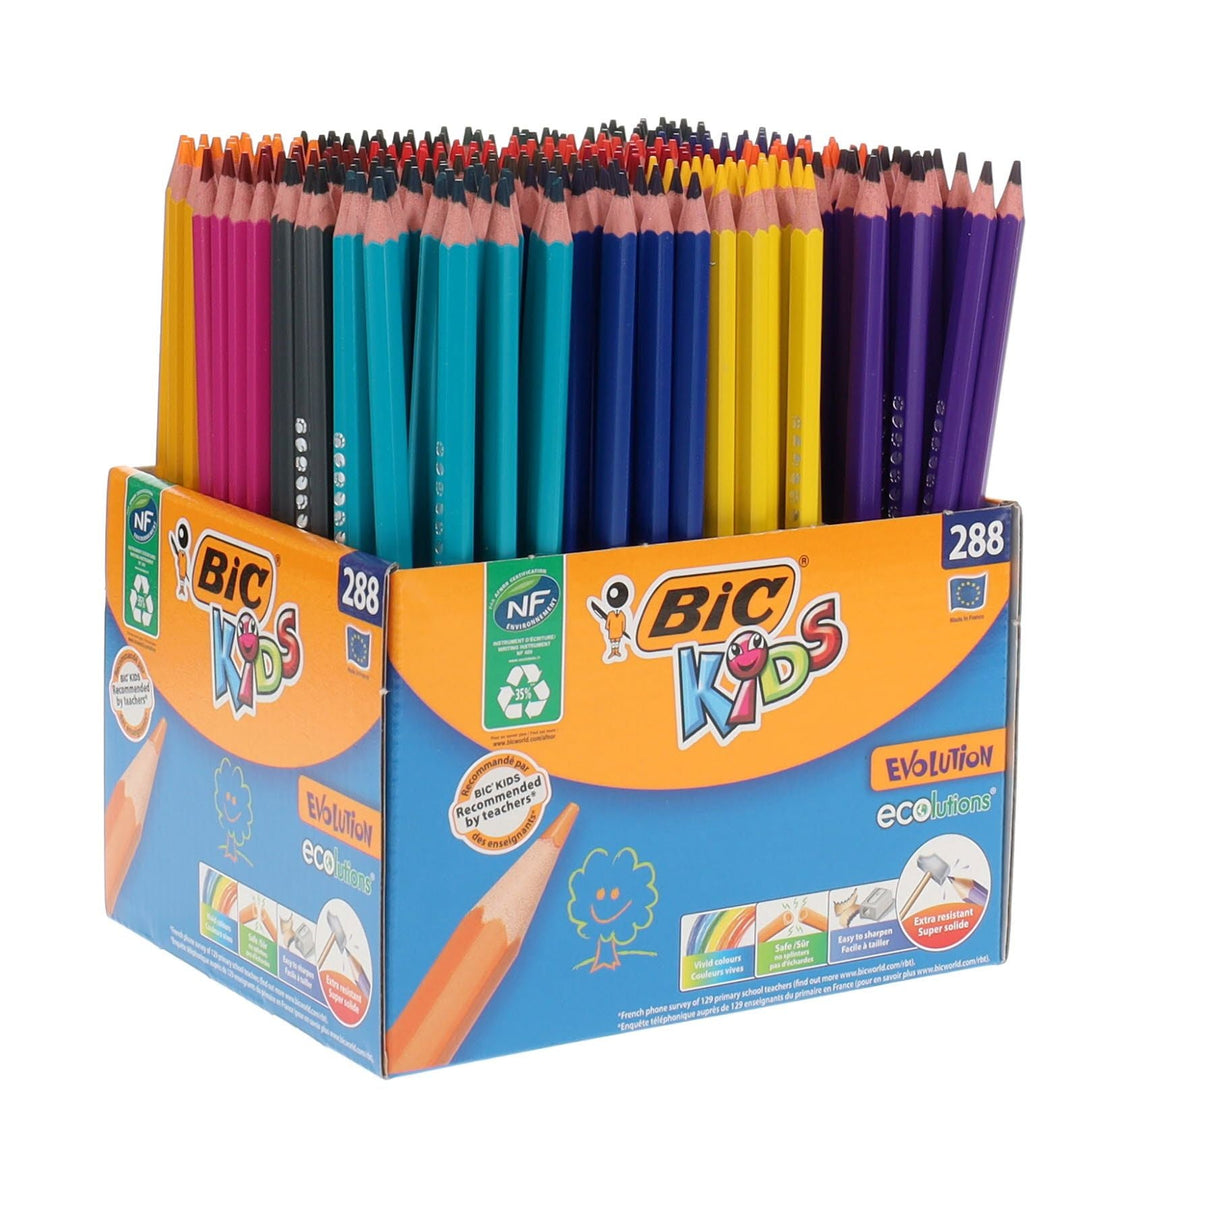 BIC Kids Evolution Colouring Pencils - Box of 288-Colouring Pencils- Buy Online at Stationery Shop UK